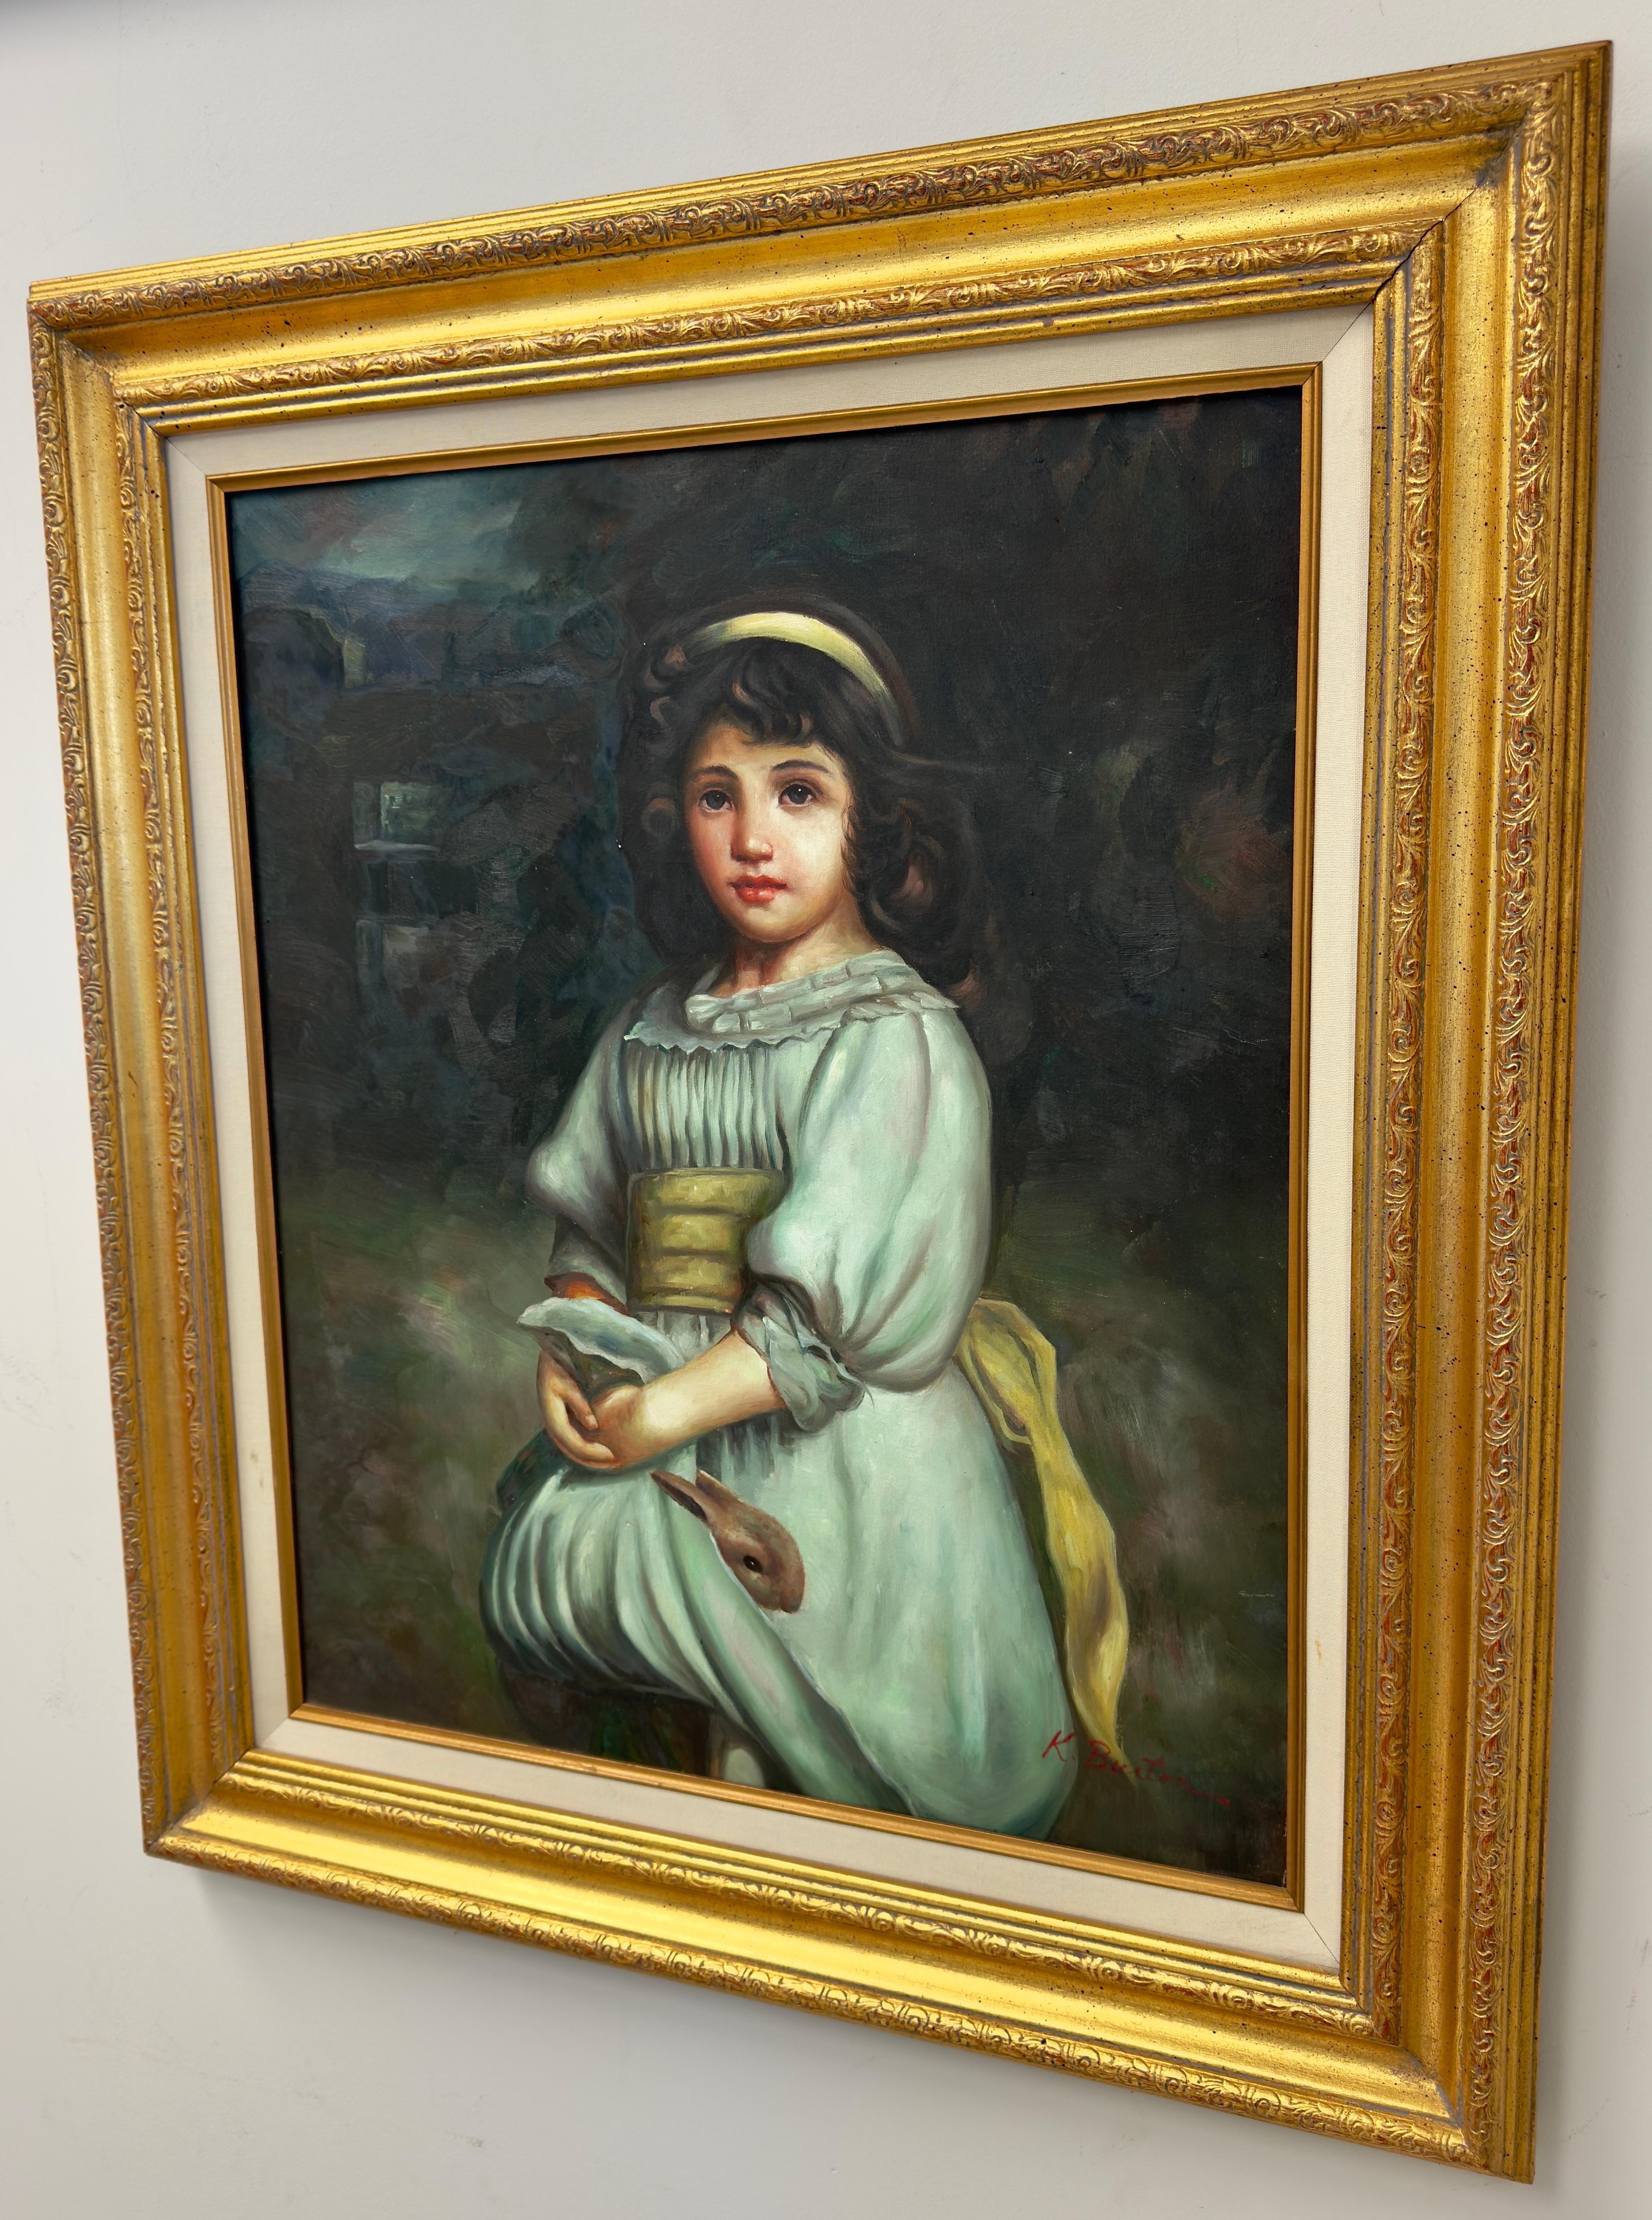 A lovely portrait of a young girl wearing a light green dress with a yellow belt and her hair embellished with yellow ribbon against a dark background.  The oil on canvas portrait is signed by the artist in red in the bottom right  